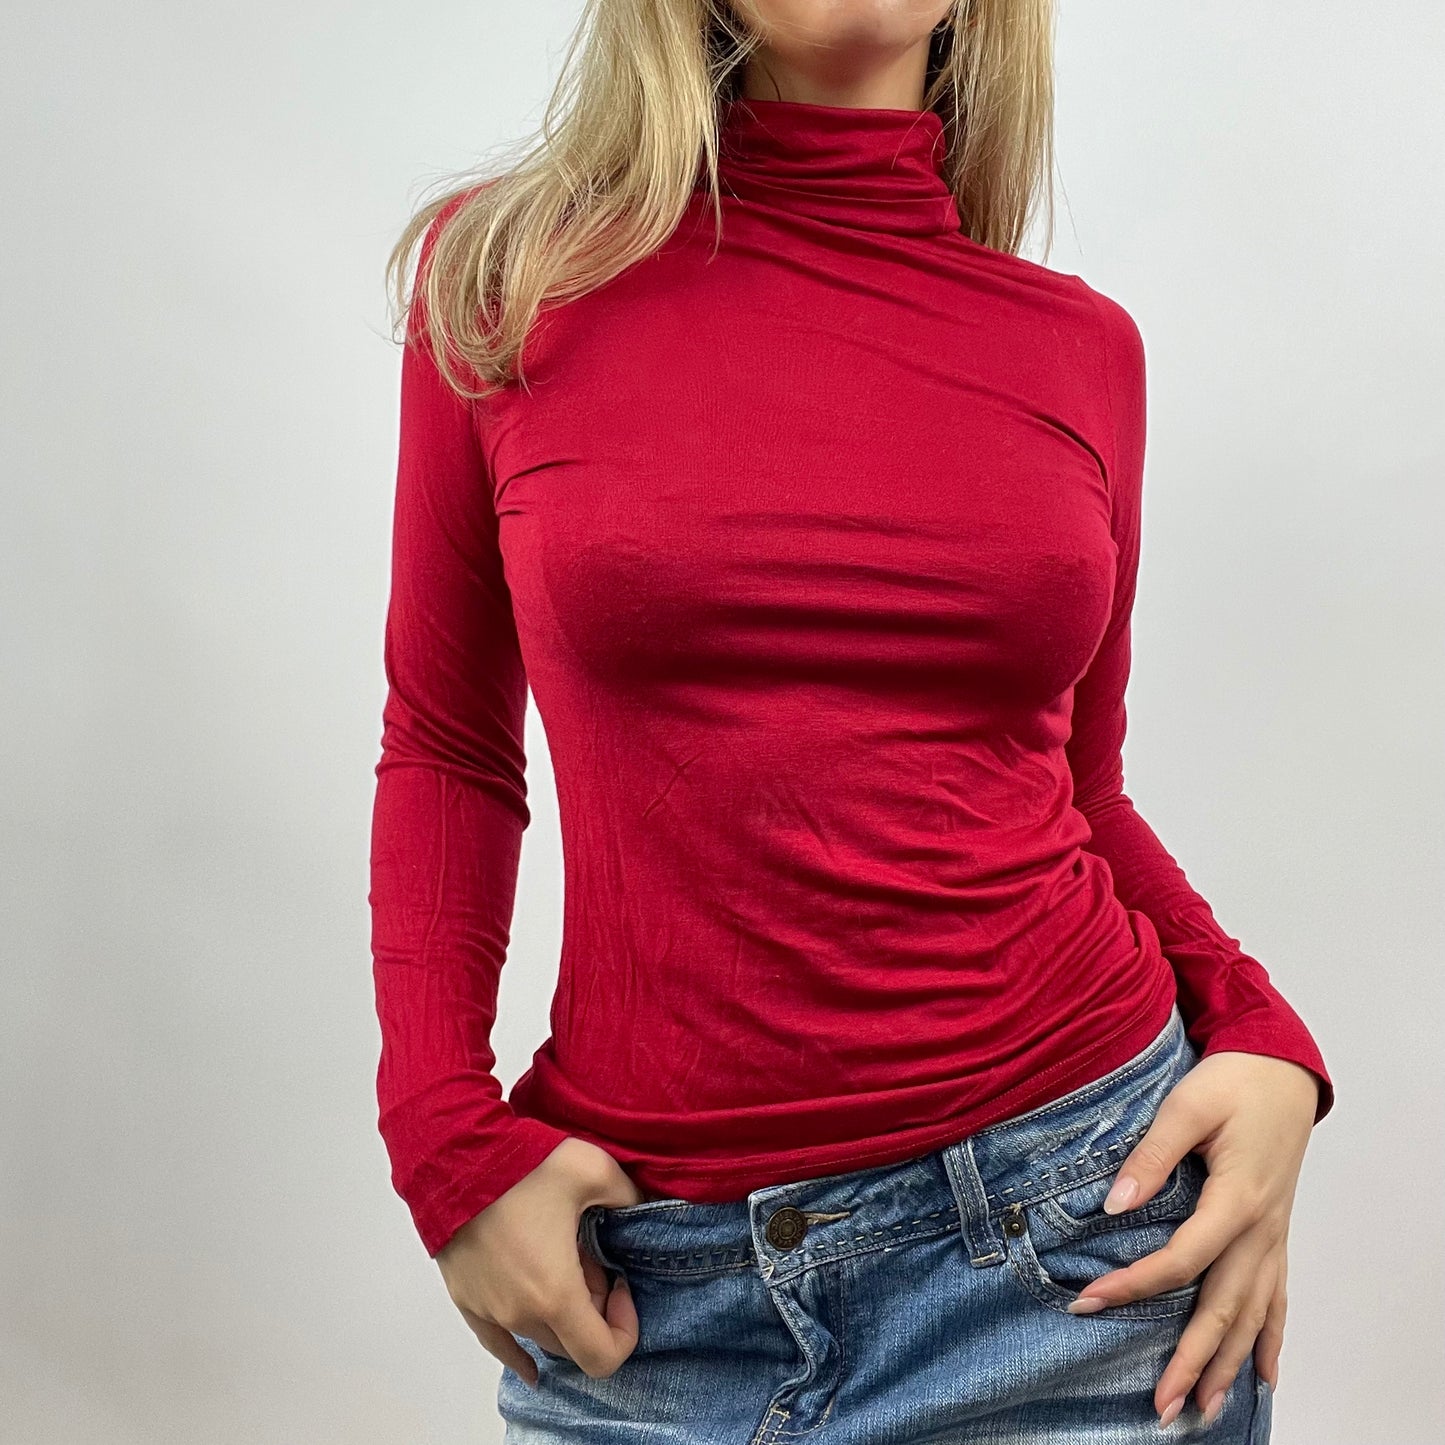 MOB WIFE DROP | small red high neck long sleeve top